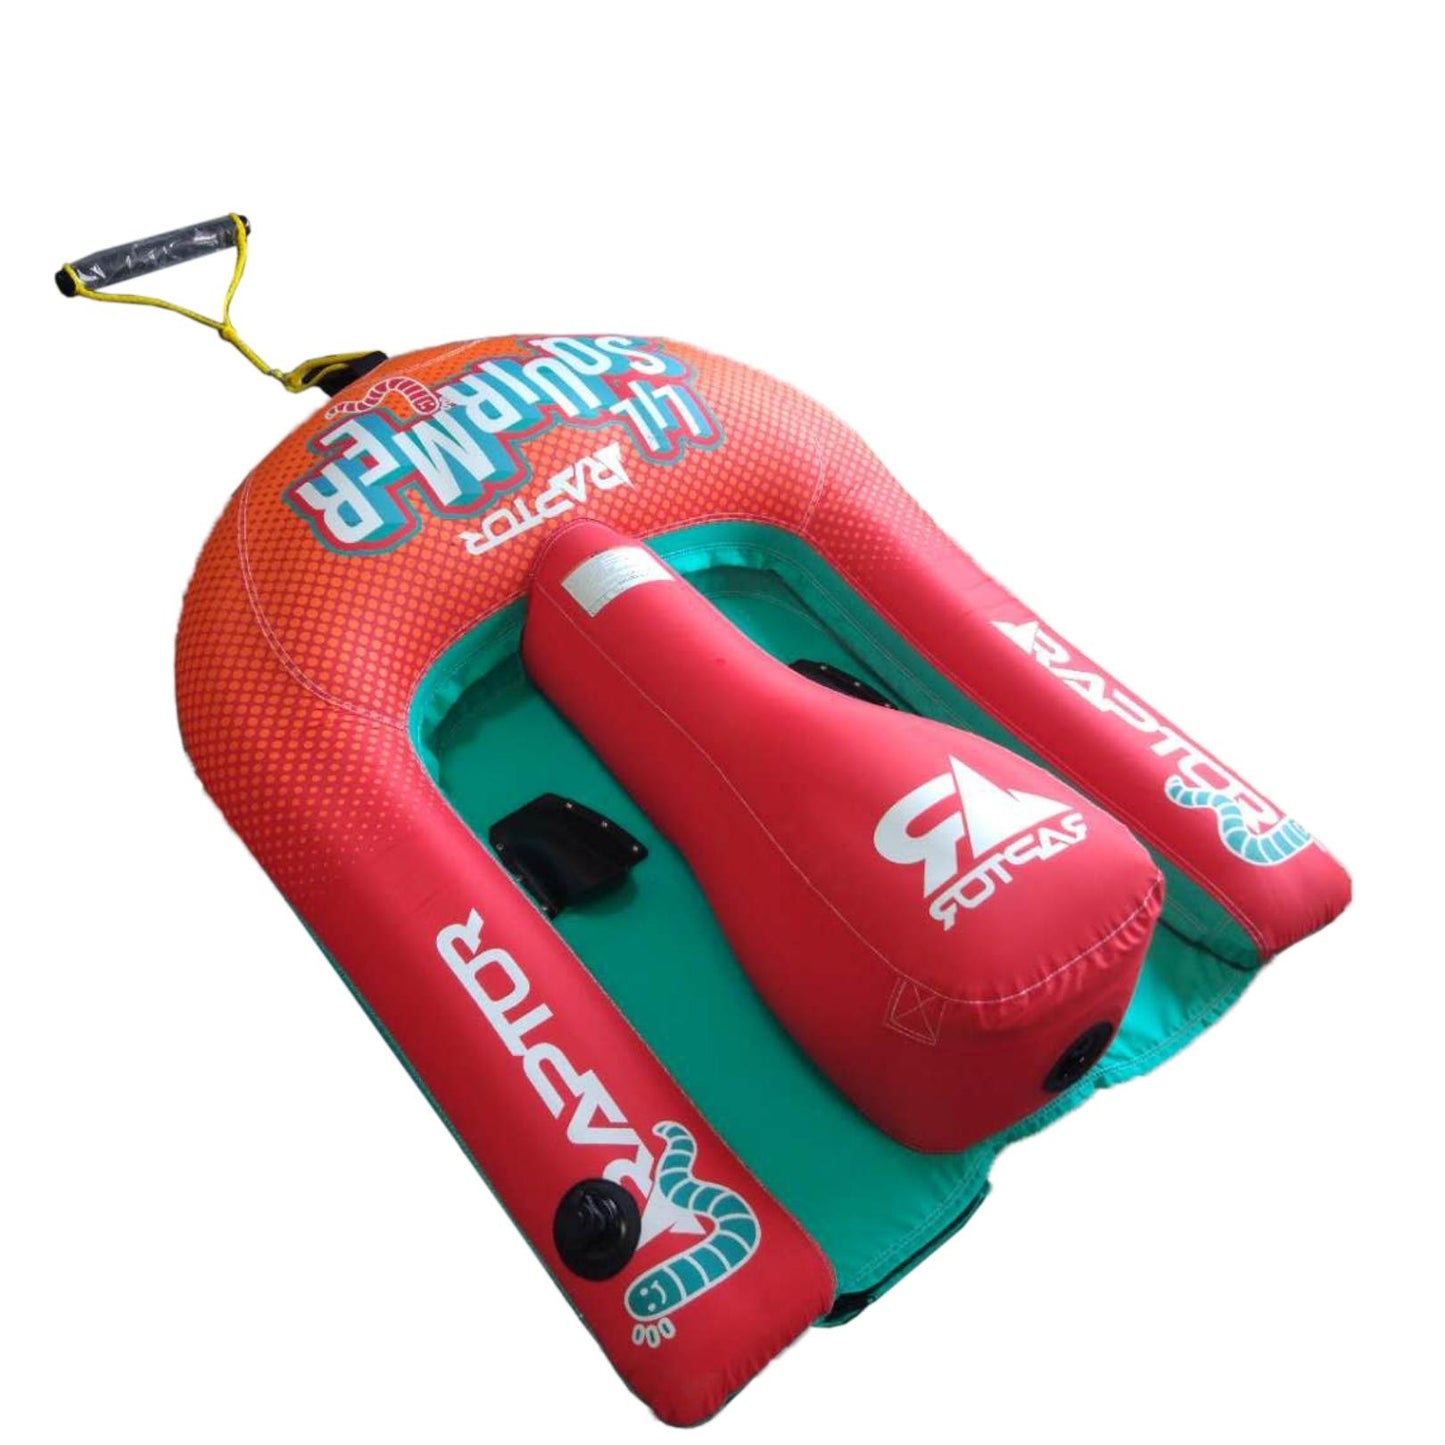 LIL SQUIRMER INFLATABLE KIDS TRAINERS